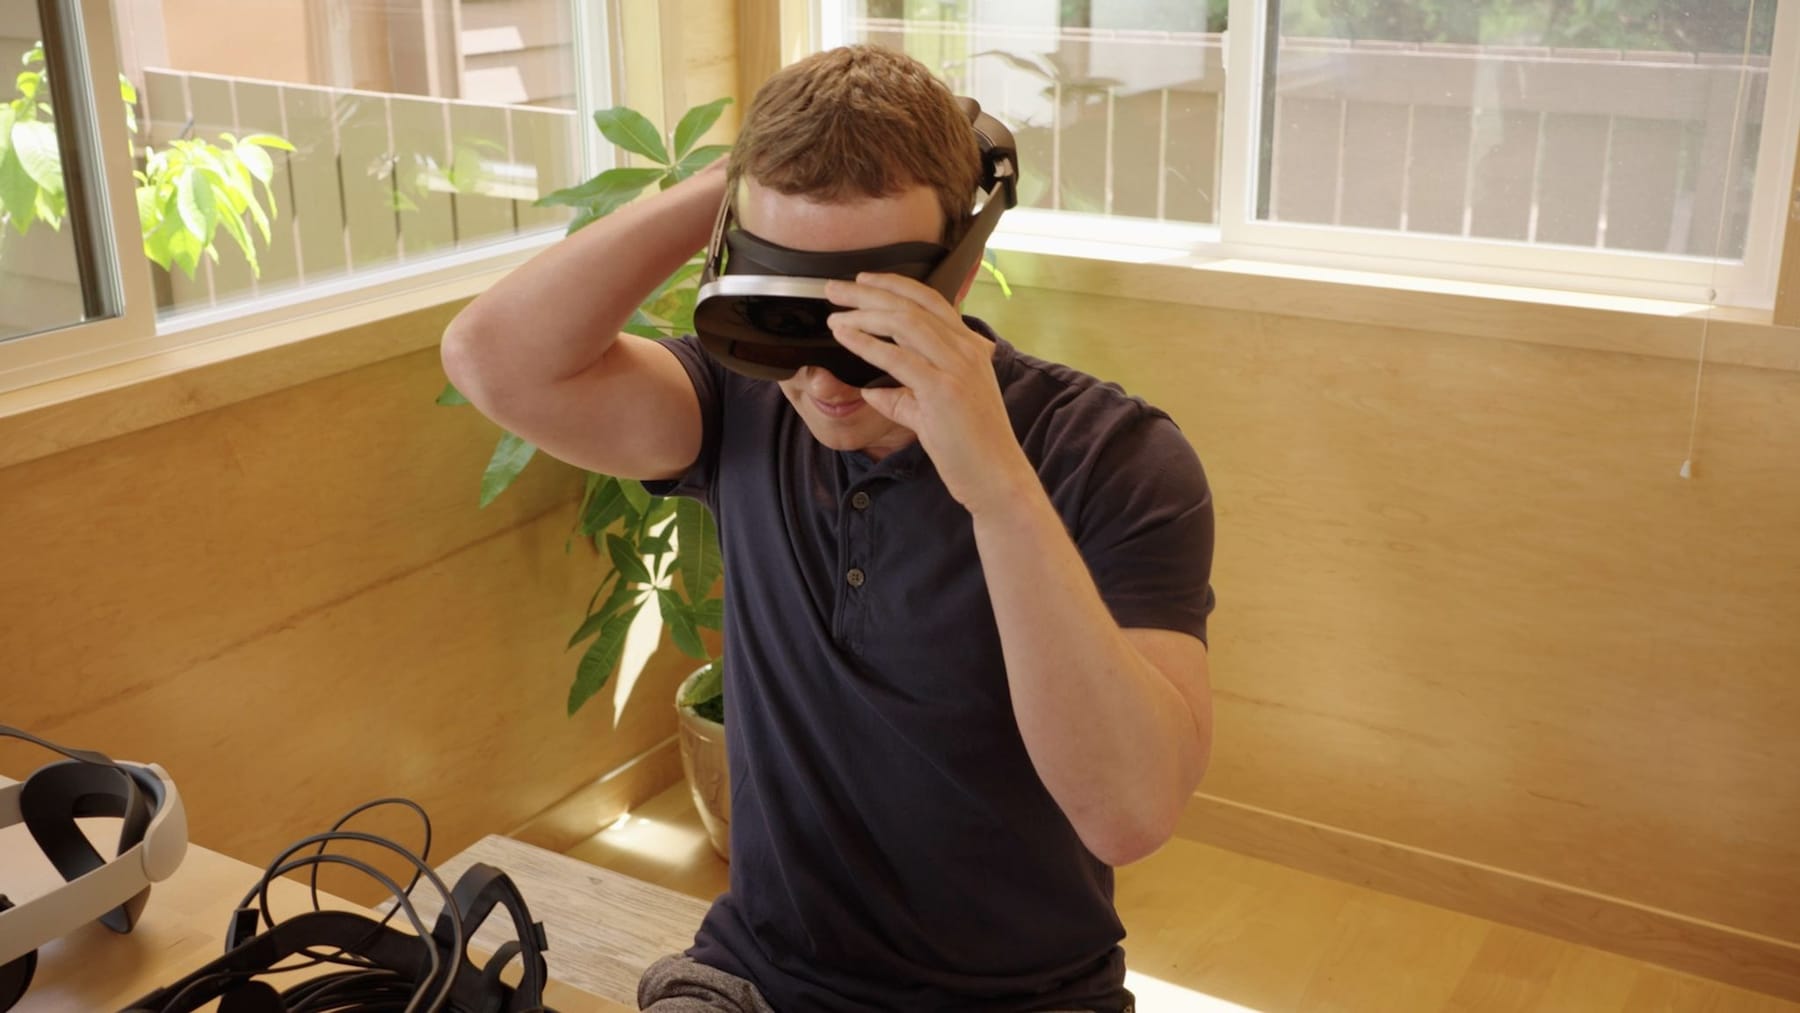 Employees are reluctant to use VR glasses – uncomfortable and awkward?